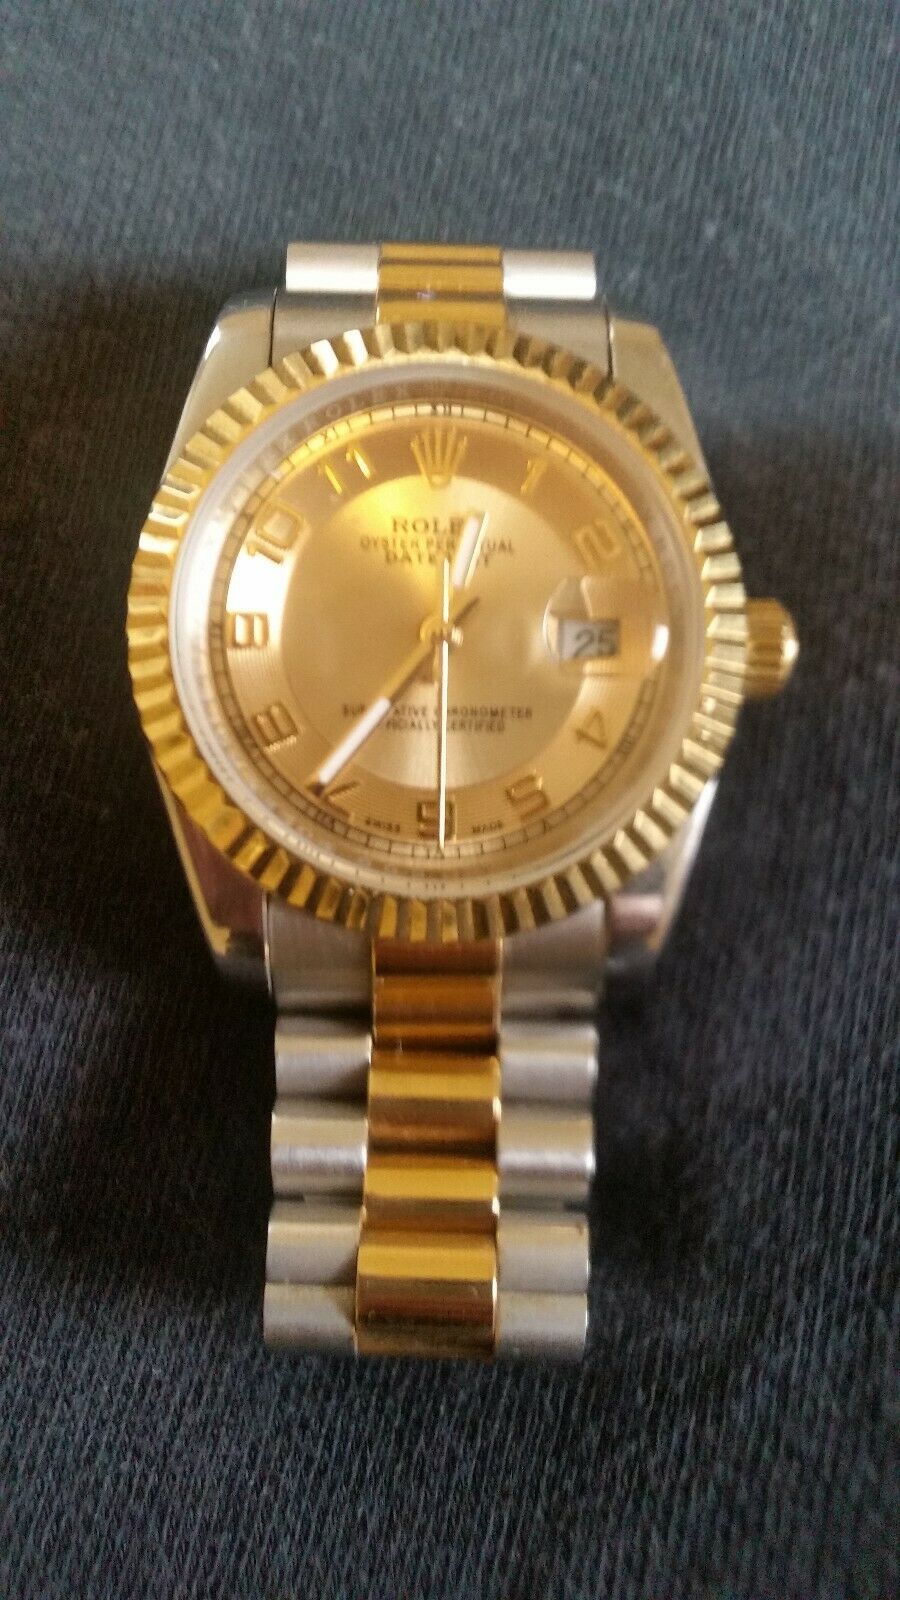 Preowned ROLEX WATCH gold and silver 